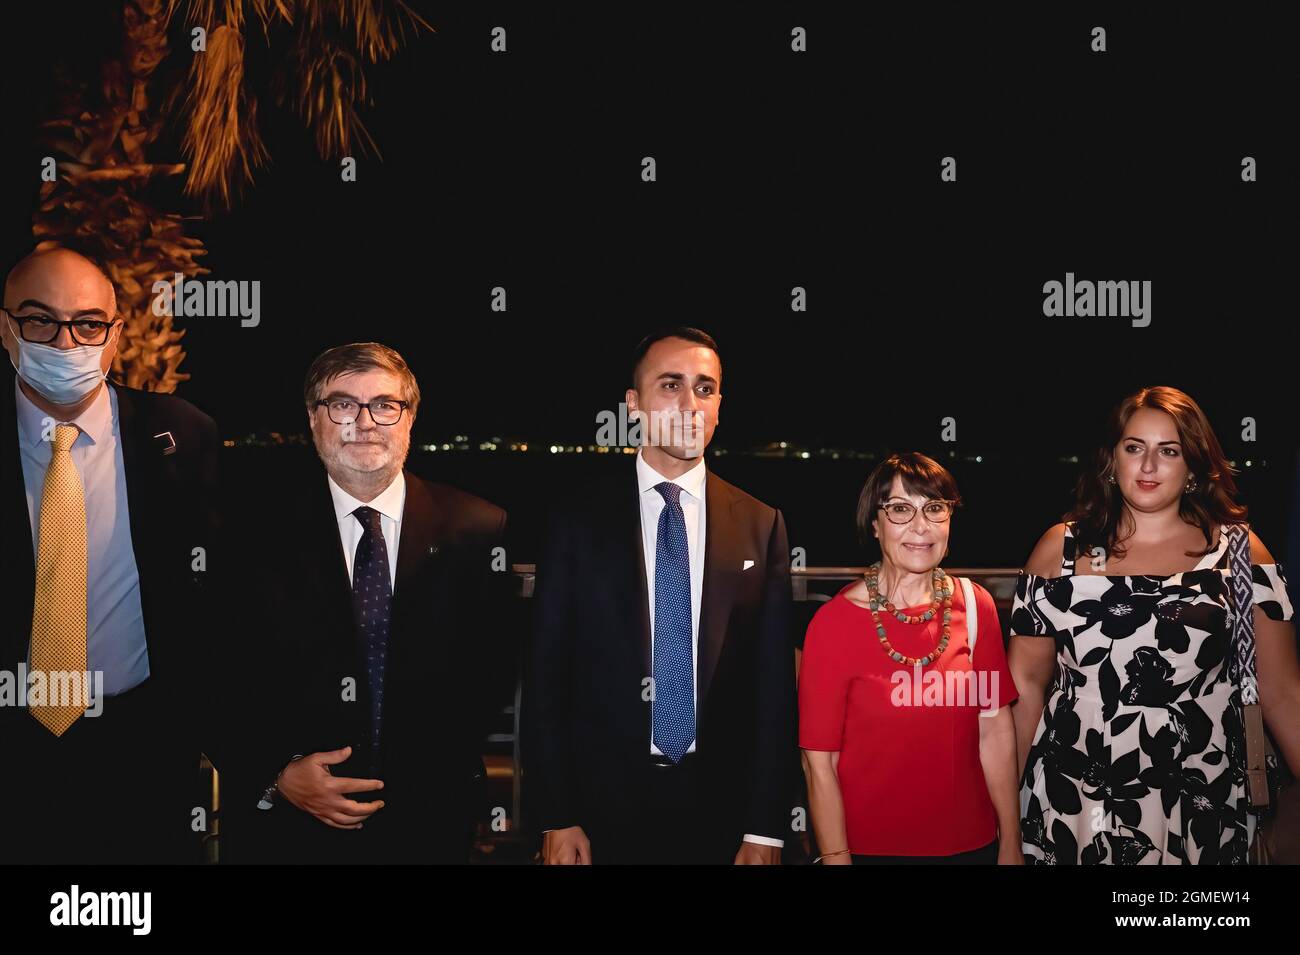 Deputy Giuseppe D’Ippolito (L),  Dalila Nesci (R), undersecretary for the South and territorial cohesion, pose with Minister Di Maio (L-C), and Amalia Bruni (R-C) in Reggio. Italian Minister of Foreign Affairs and International Cooperation Luigi di Maio (M5S, Movimento 5 Stelle)  arrived in Reggio Calabria in support of the aspiring Governor Amalia Bruni (PD, Partito Democratico),  candidate for the centre-left coalition at the Regional elections (3-4 October 2021). Di Maio and Bruni met their supporters at the Chamber of Commerce and later during a dinner at Pepy's Beach Restaurant. (Photo by Stock Photo